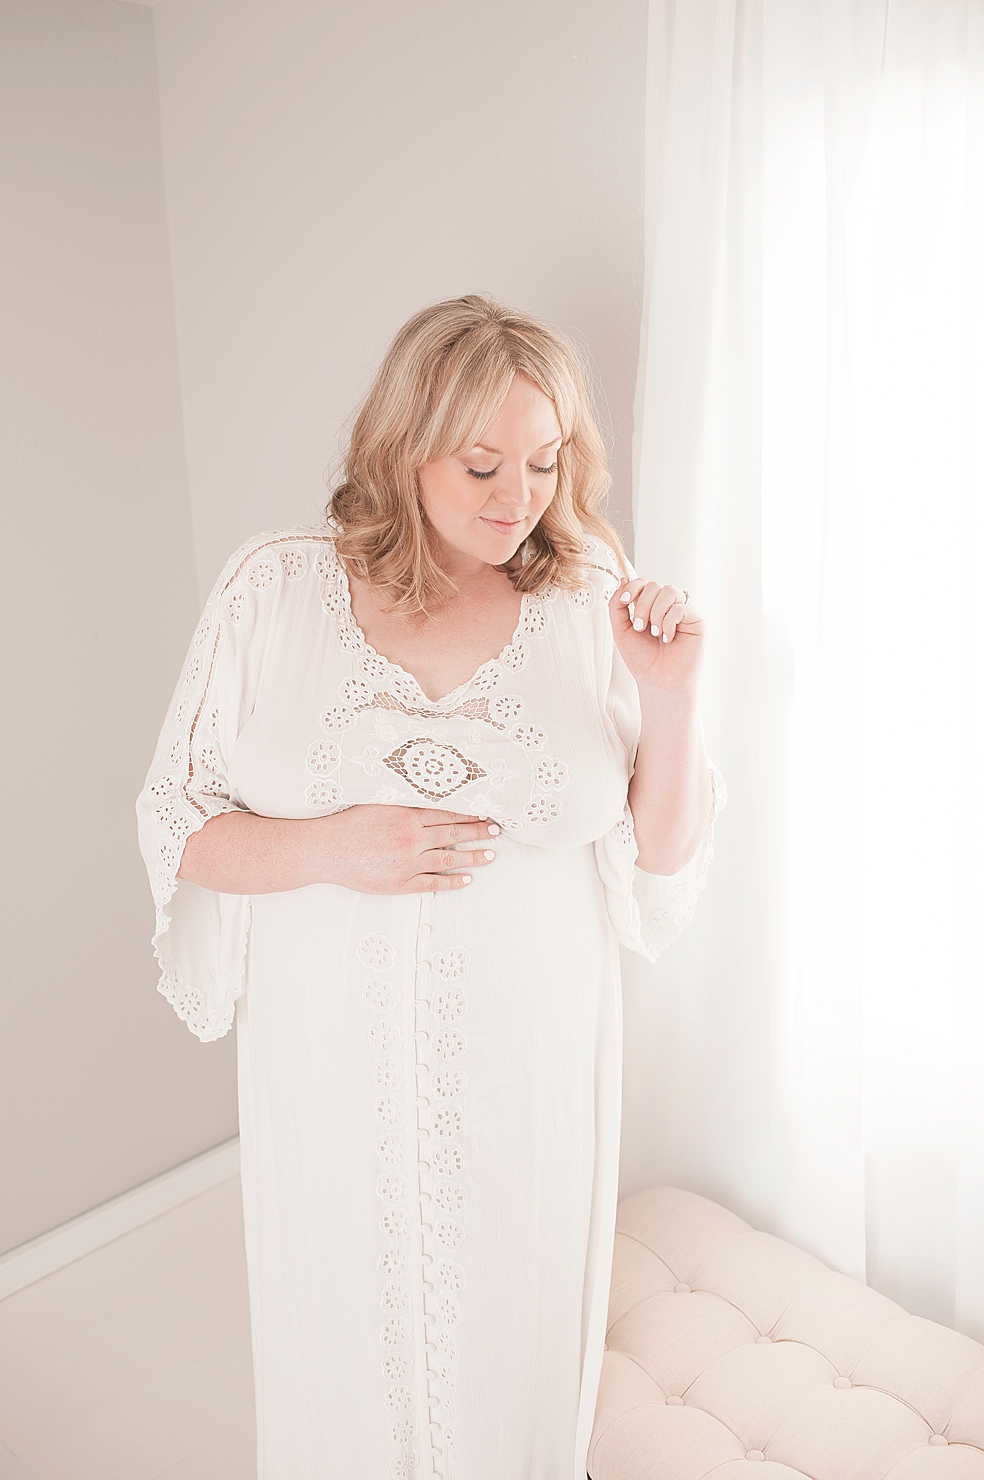 Mom to be in long white dress | Photo by Decatur Alabama Maternity Photographer Jessica Lee